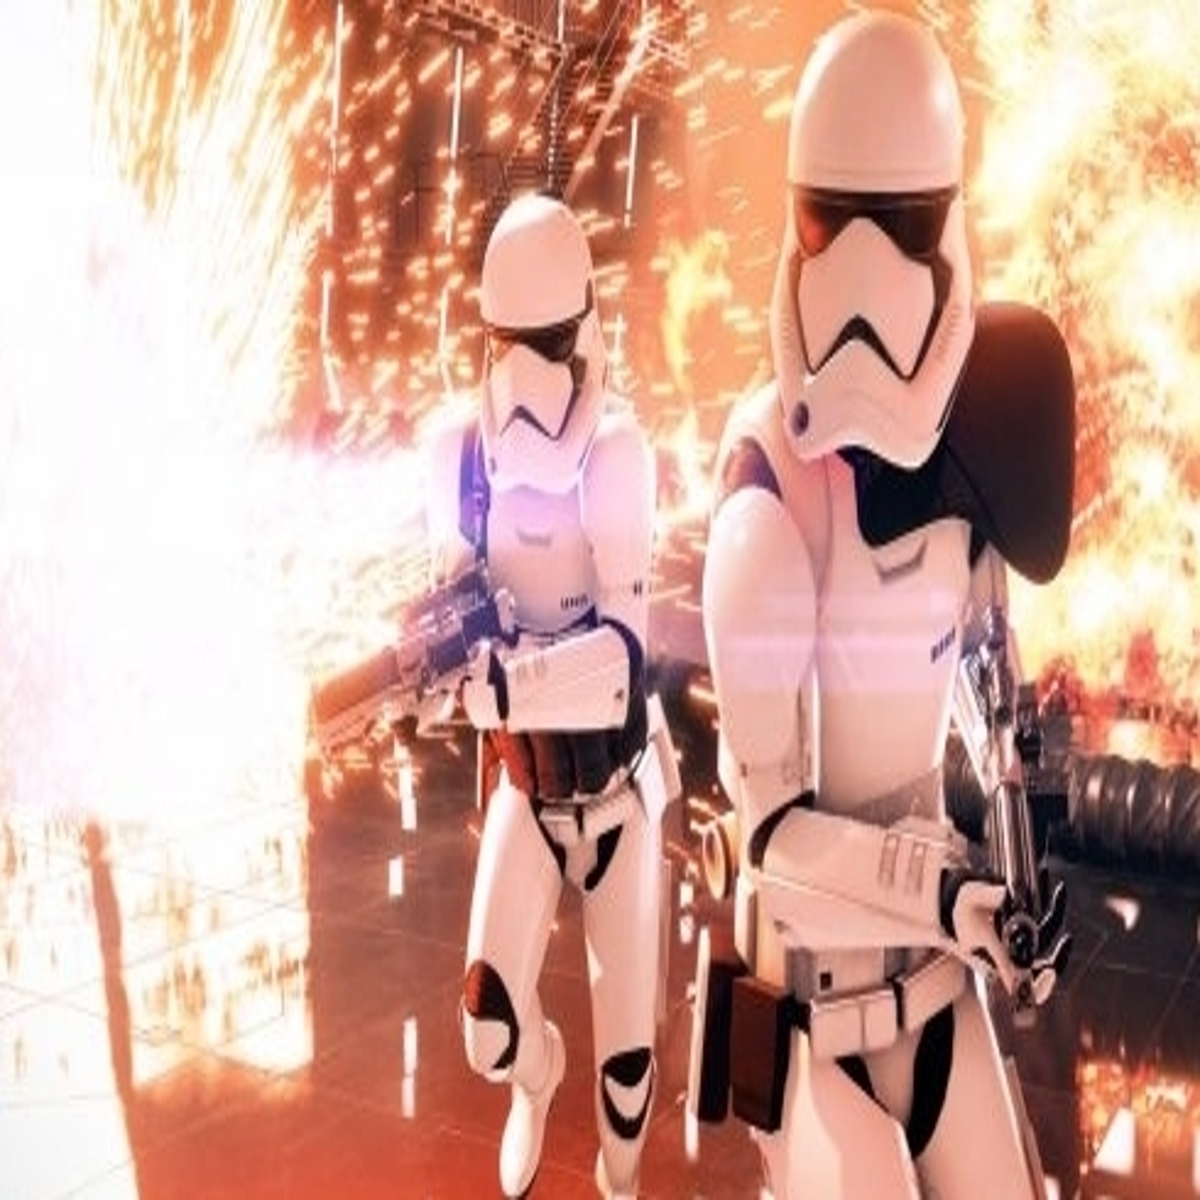 Star Wars: Battlefront 3 Receives Disappointing Update